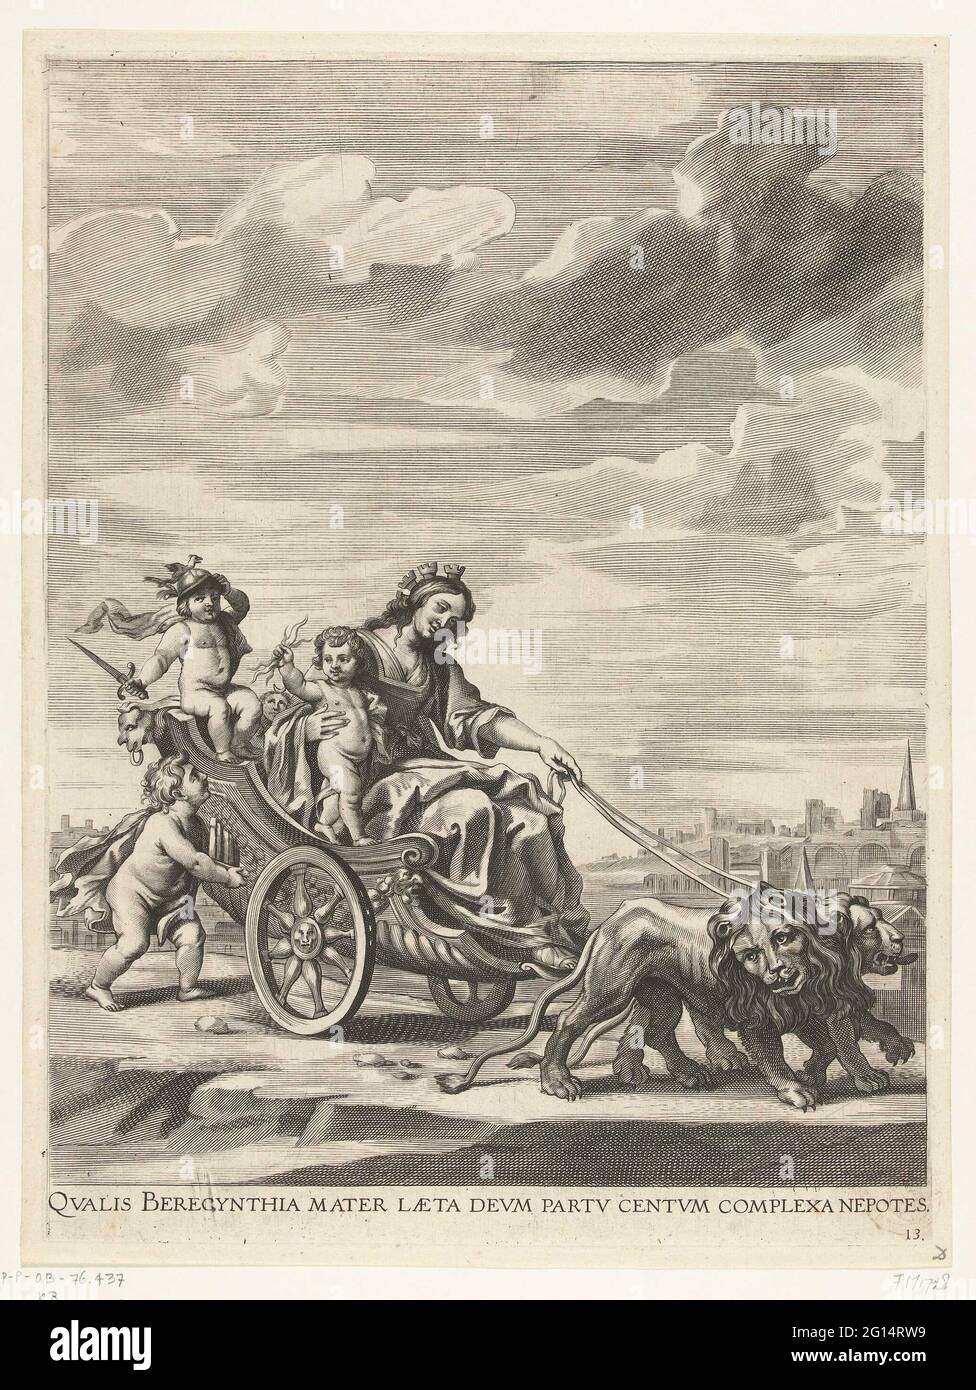 Allegory with the city mawn from Ghent in her chariot; entry from Ferdinand in Ghent in 1635 (no. 13); Qualis Berecynthia Mater Laeta Deum Partu Centum Complexa Nepotes; Tabula I. Adversae Partis. Cybele Ganda Opposita. Allegory with the city mawn from Ghent in her chariot drawn by lions. Allegory with Cybele as Ghent as the birthplace of Emperor Charles V. Performance at the center of the Triomf gate. Leaf No. 13 in a set of 42 plates that illustrate the publication of the description of the arrival of the Cardinal Infant Ferdinand in Austria in Ghent on January 28, 1635 as the new governor f Stock Photo